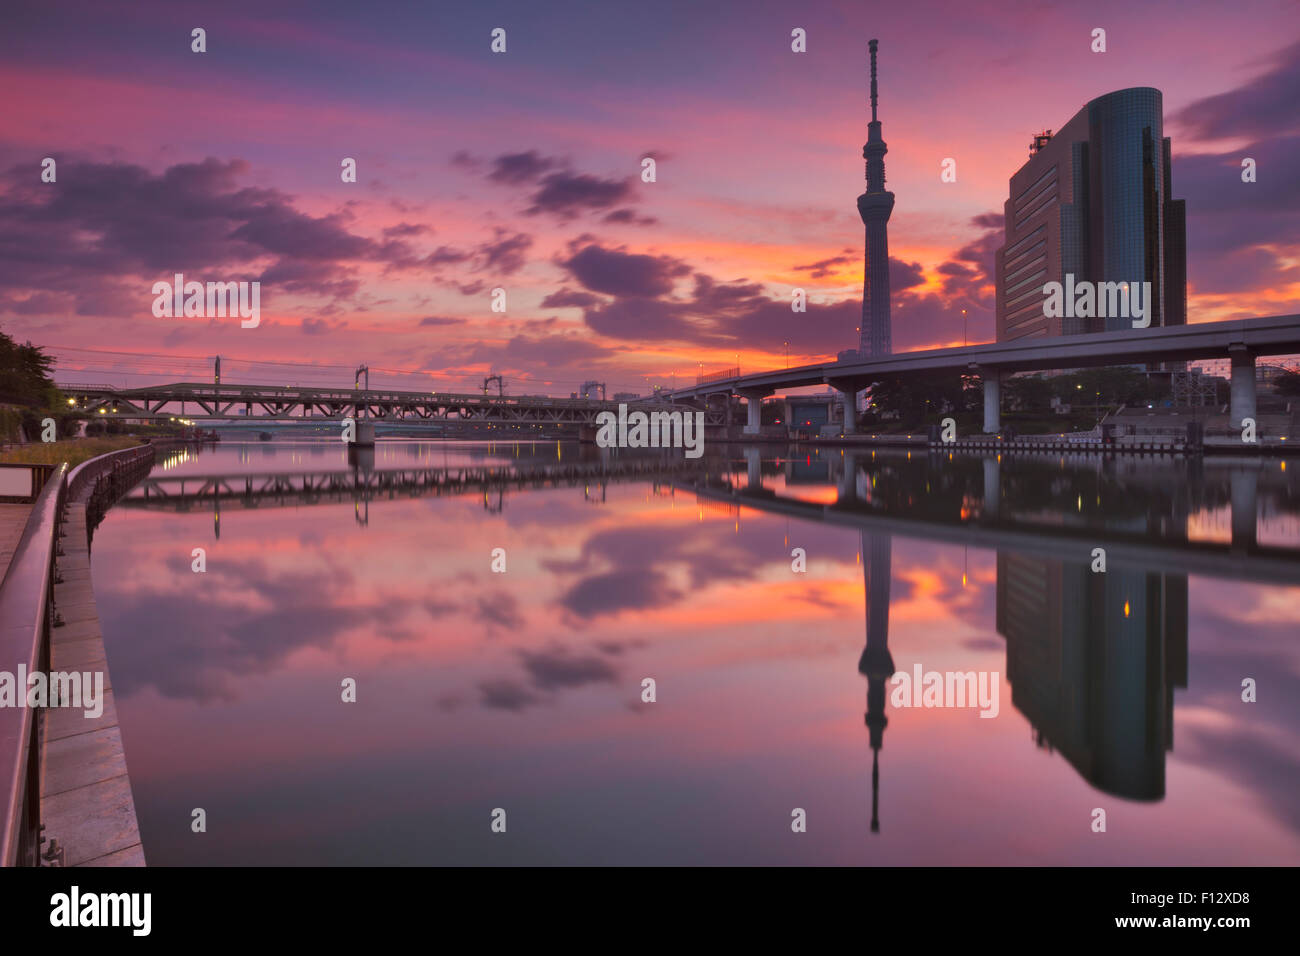 The Tokyo Sky Tree in Tokyo, Japan, reflected in the Sumida River at sunrise. Stock Photo